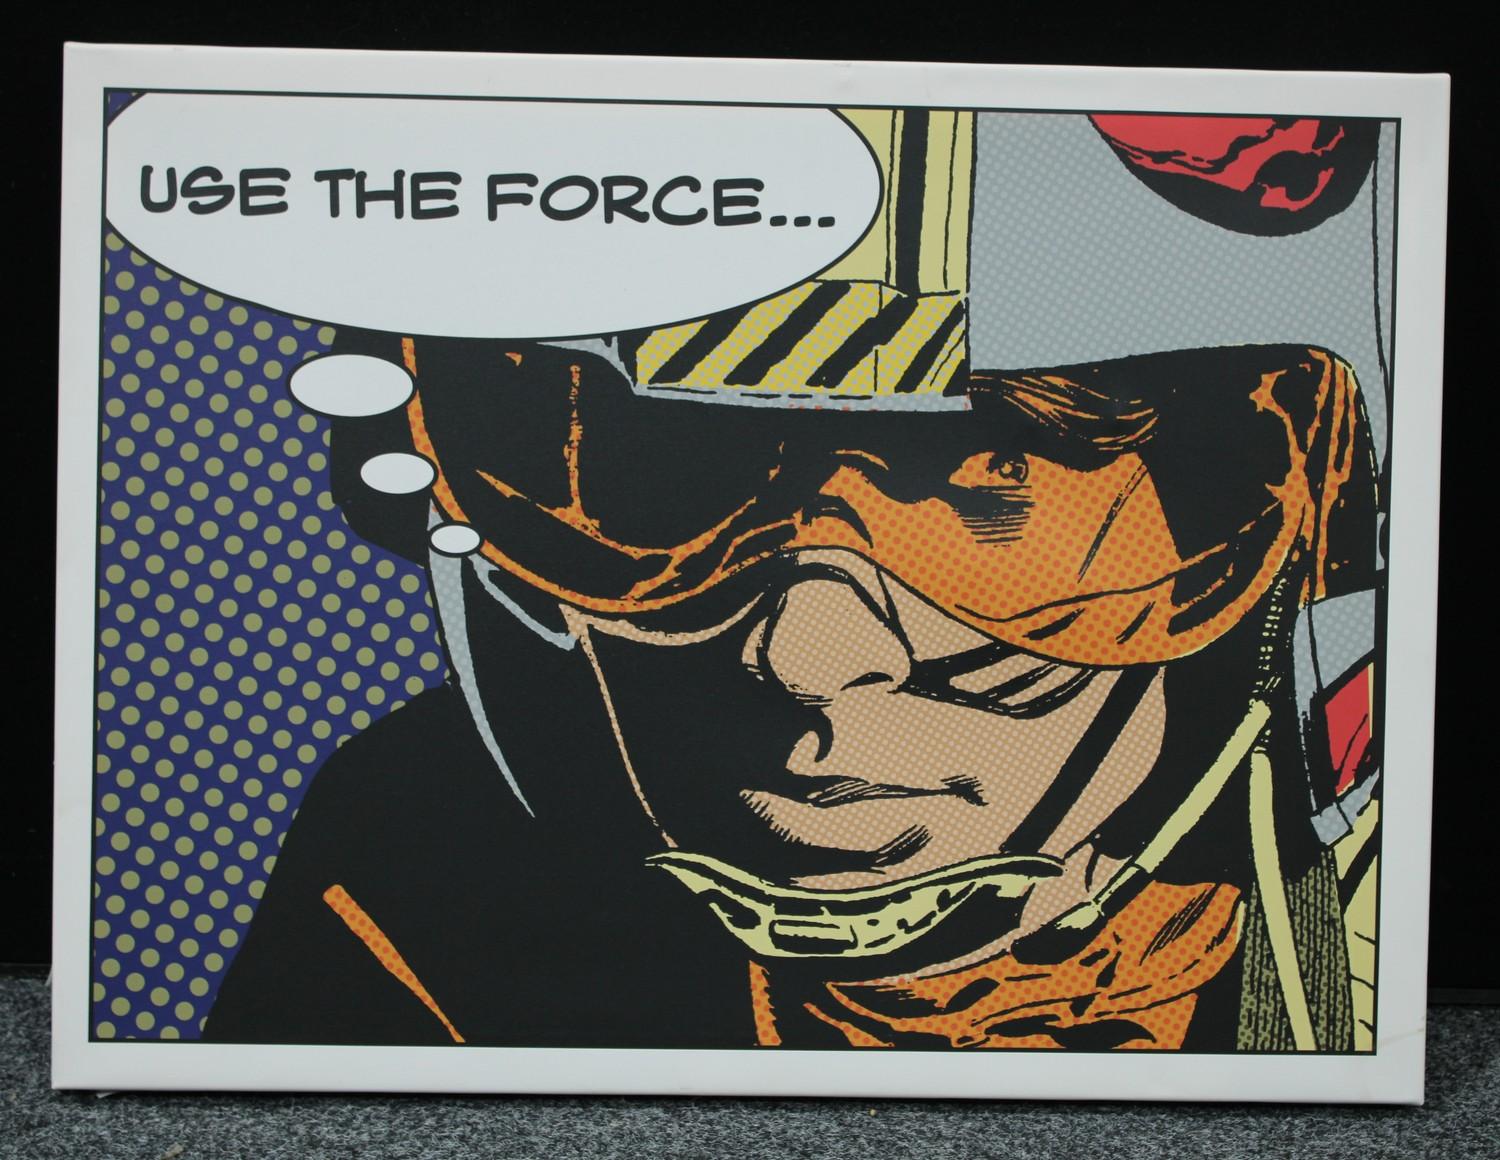 Pictures & Prints - Movie Memorabilia - an officially licenced Star Wars canvas, Use the Force